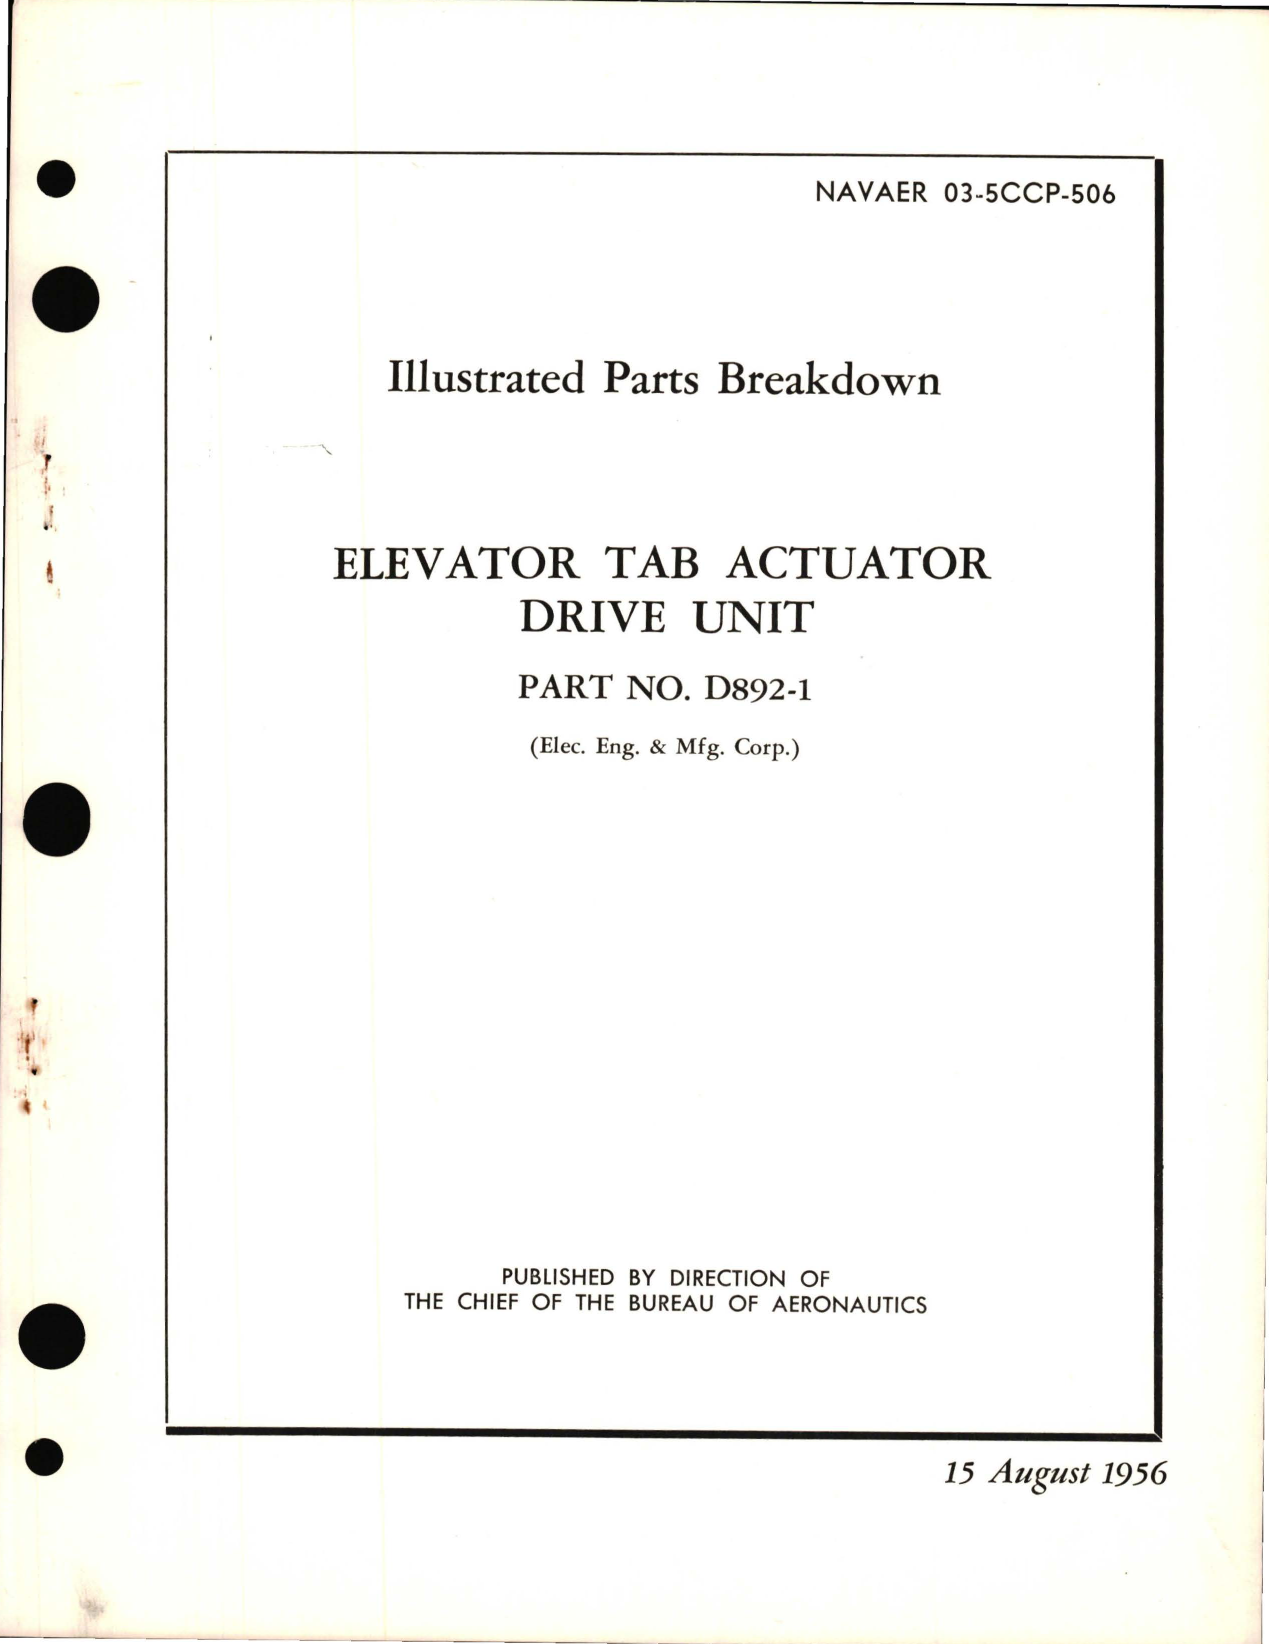 Sample page 1 from AirCorps Library document: Illustrated Parts Breakdown for Elevator Tab Actuator Drive Unit - Part D892-1